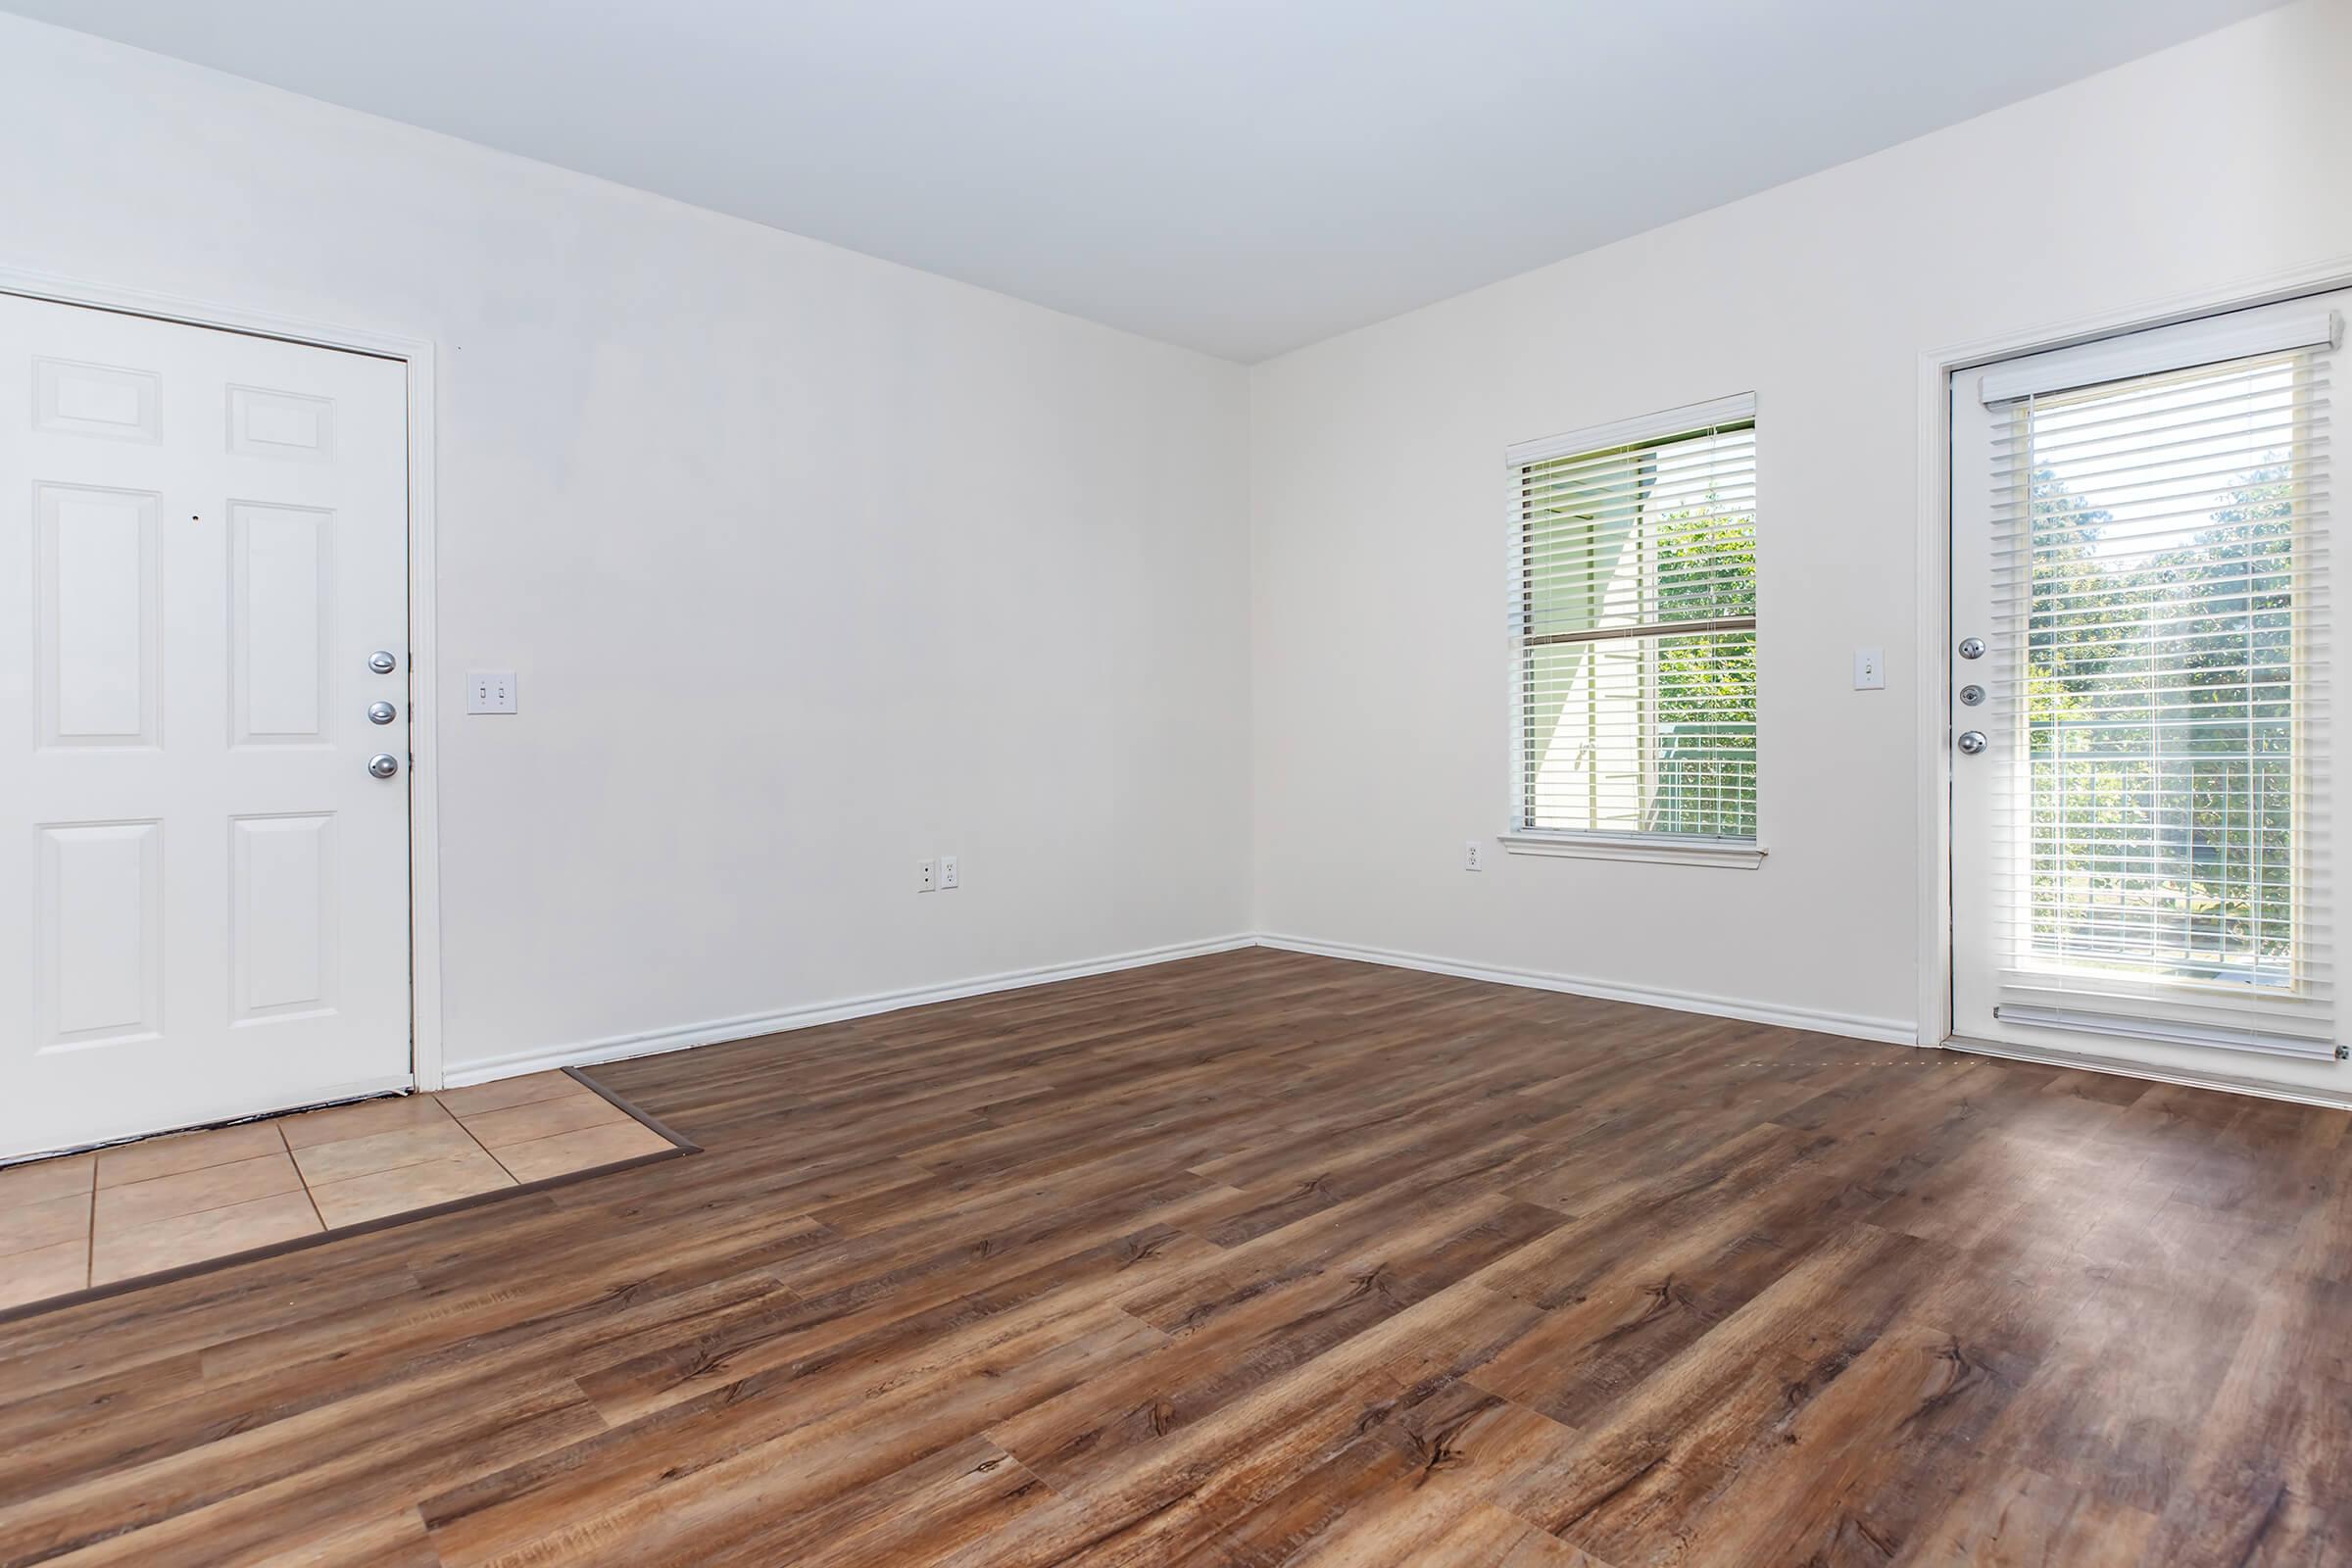 a large empty room with a wooden floor